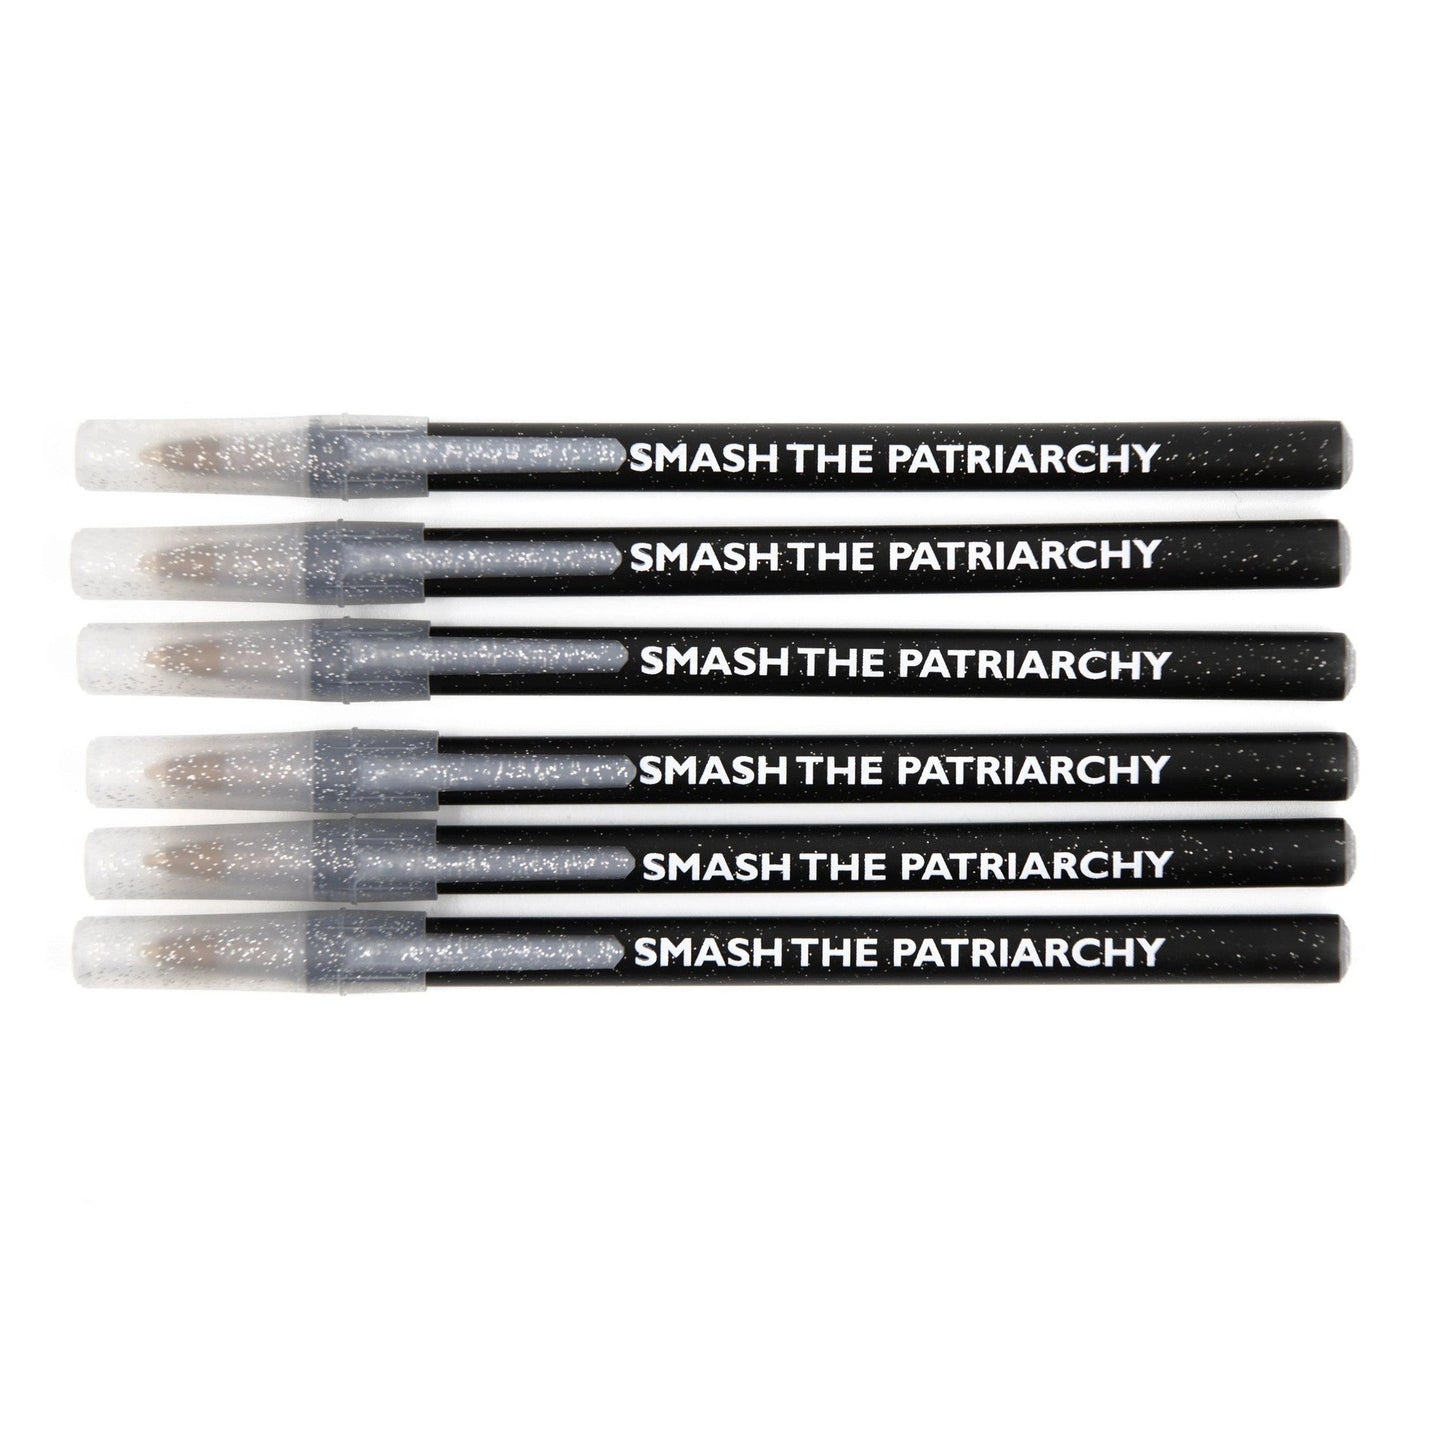 Smash the Patriarchy Pens in Galaxy Sparkle - 6 Pens